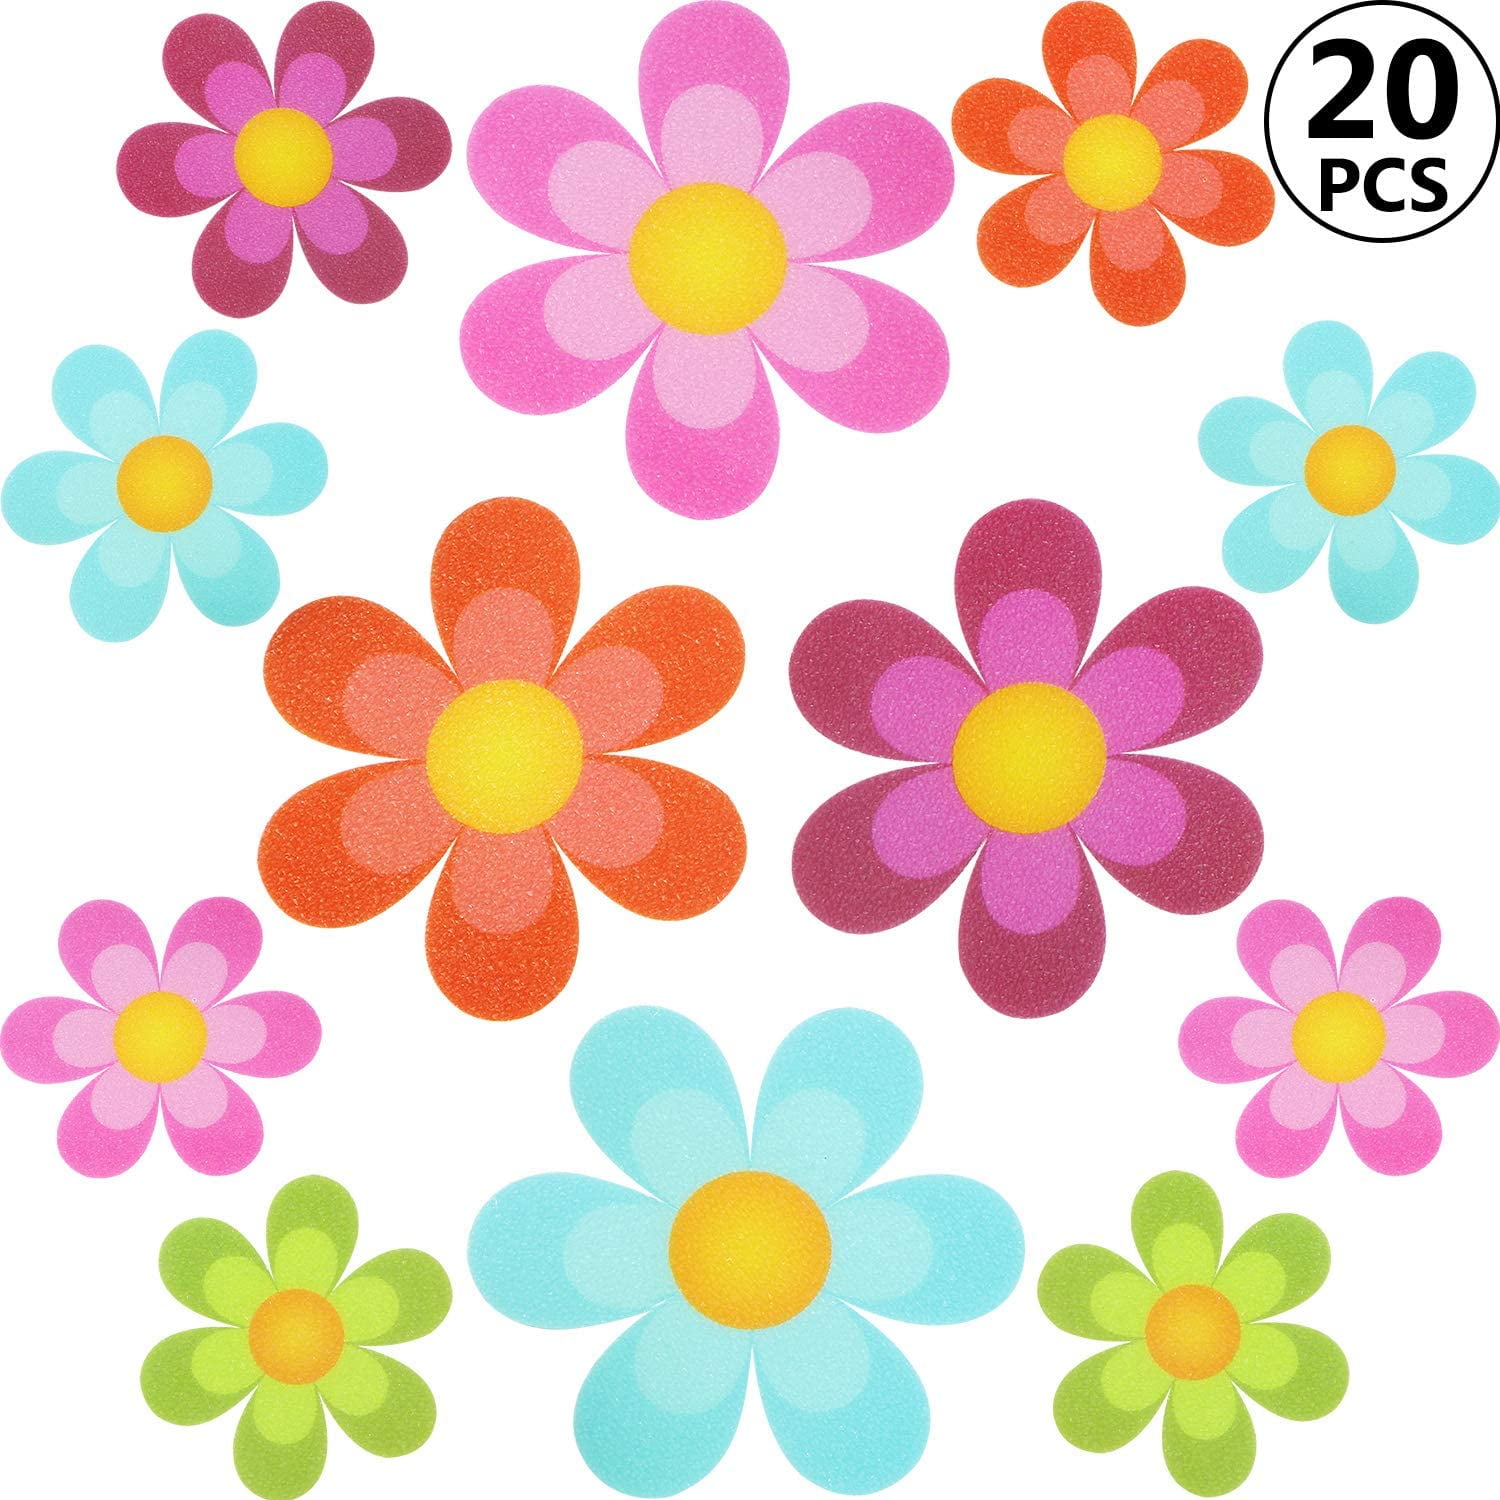 20 Non Slip Flower Stickers Decals Tape Mat for Bath Tub Stairs Shower Appliques 